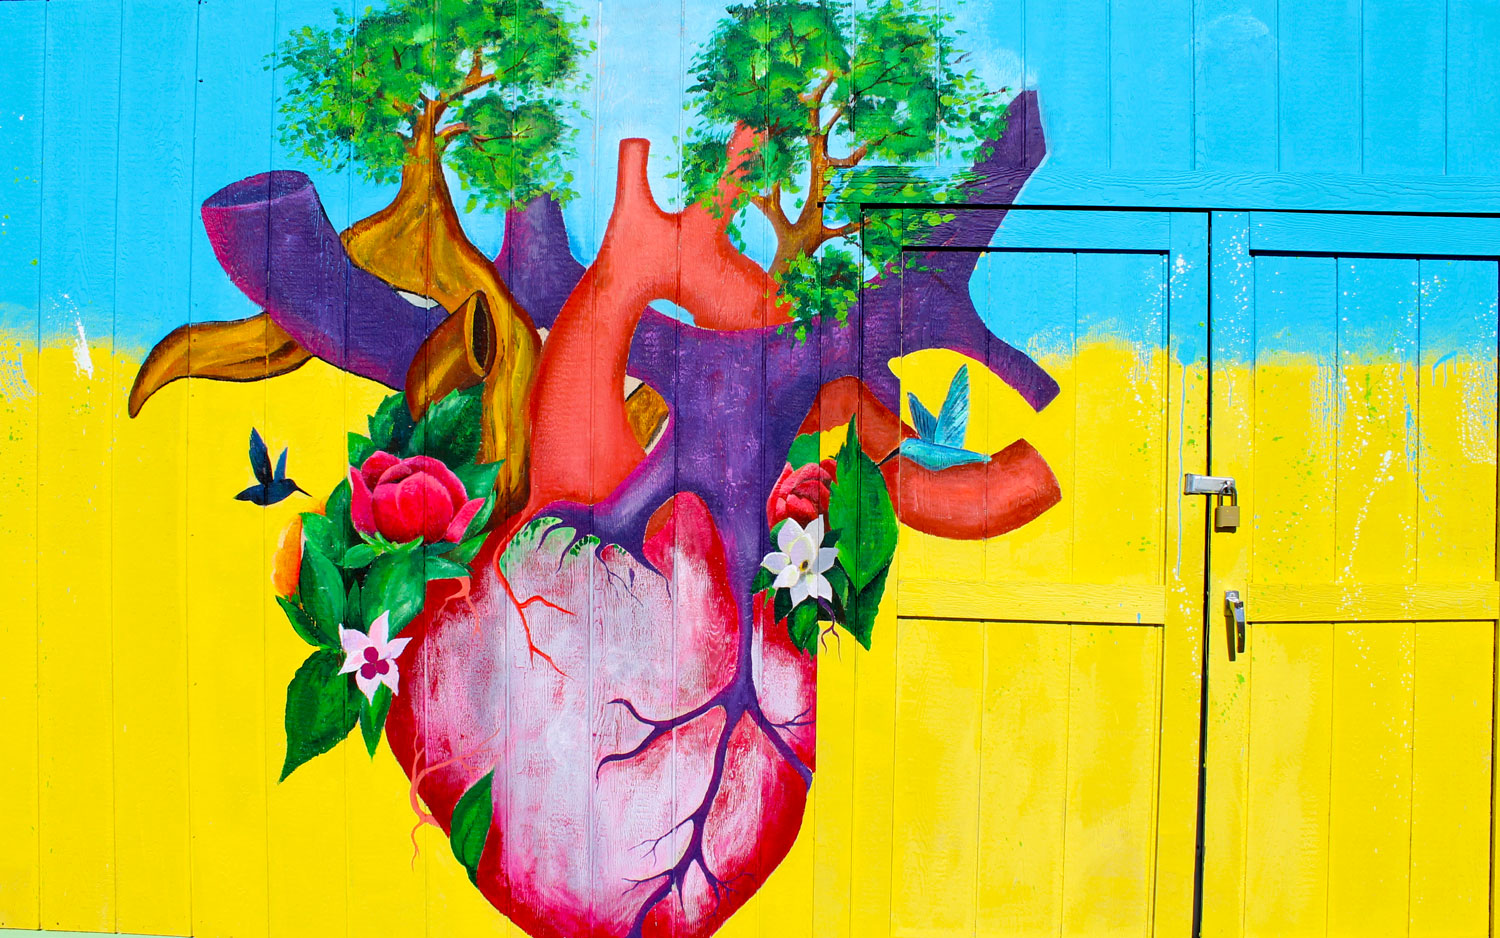 Close-up view of a building wall and double doors. The top half of the background is painted light blue, the bottom half is painted yellow, with a blurred boundry between them. In the center is a human heart, from which sprout trees and flowers that have attracted humingbirds.